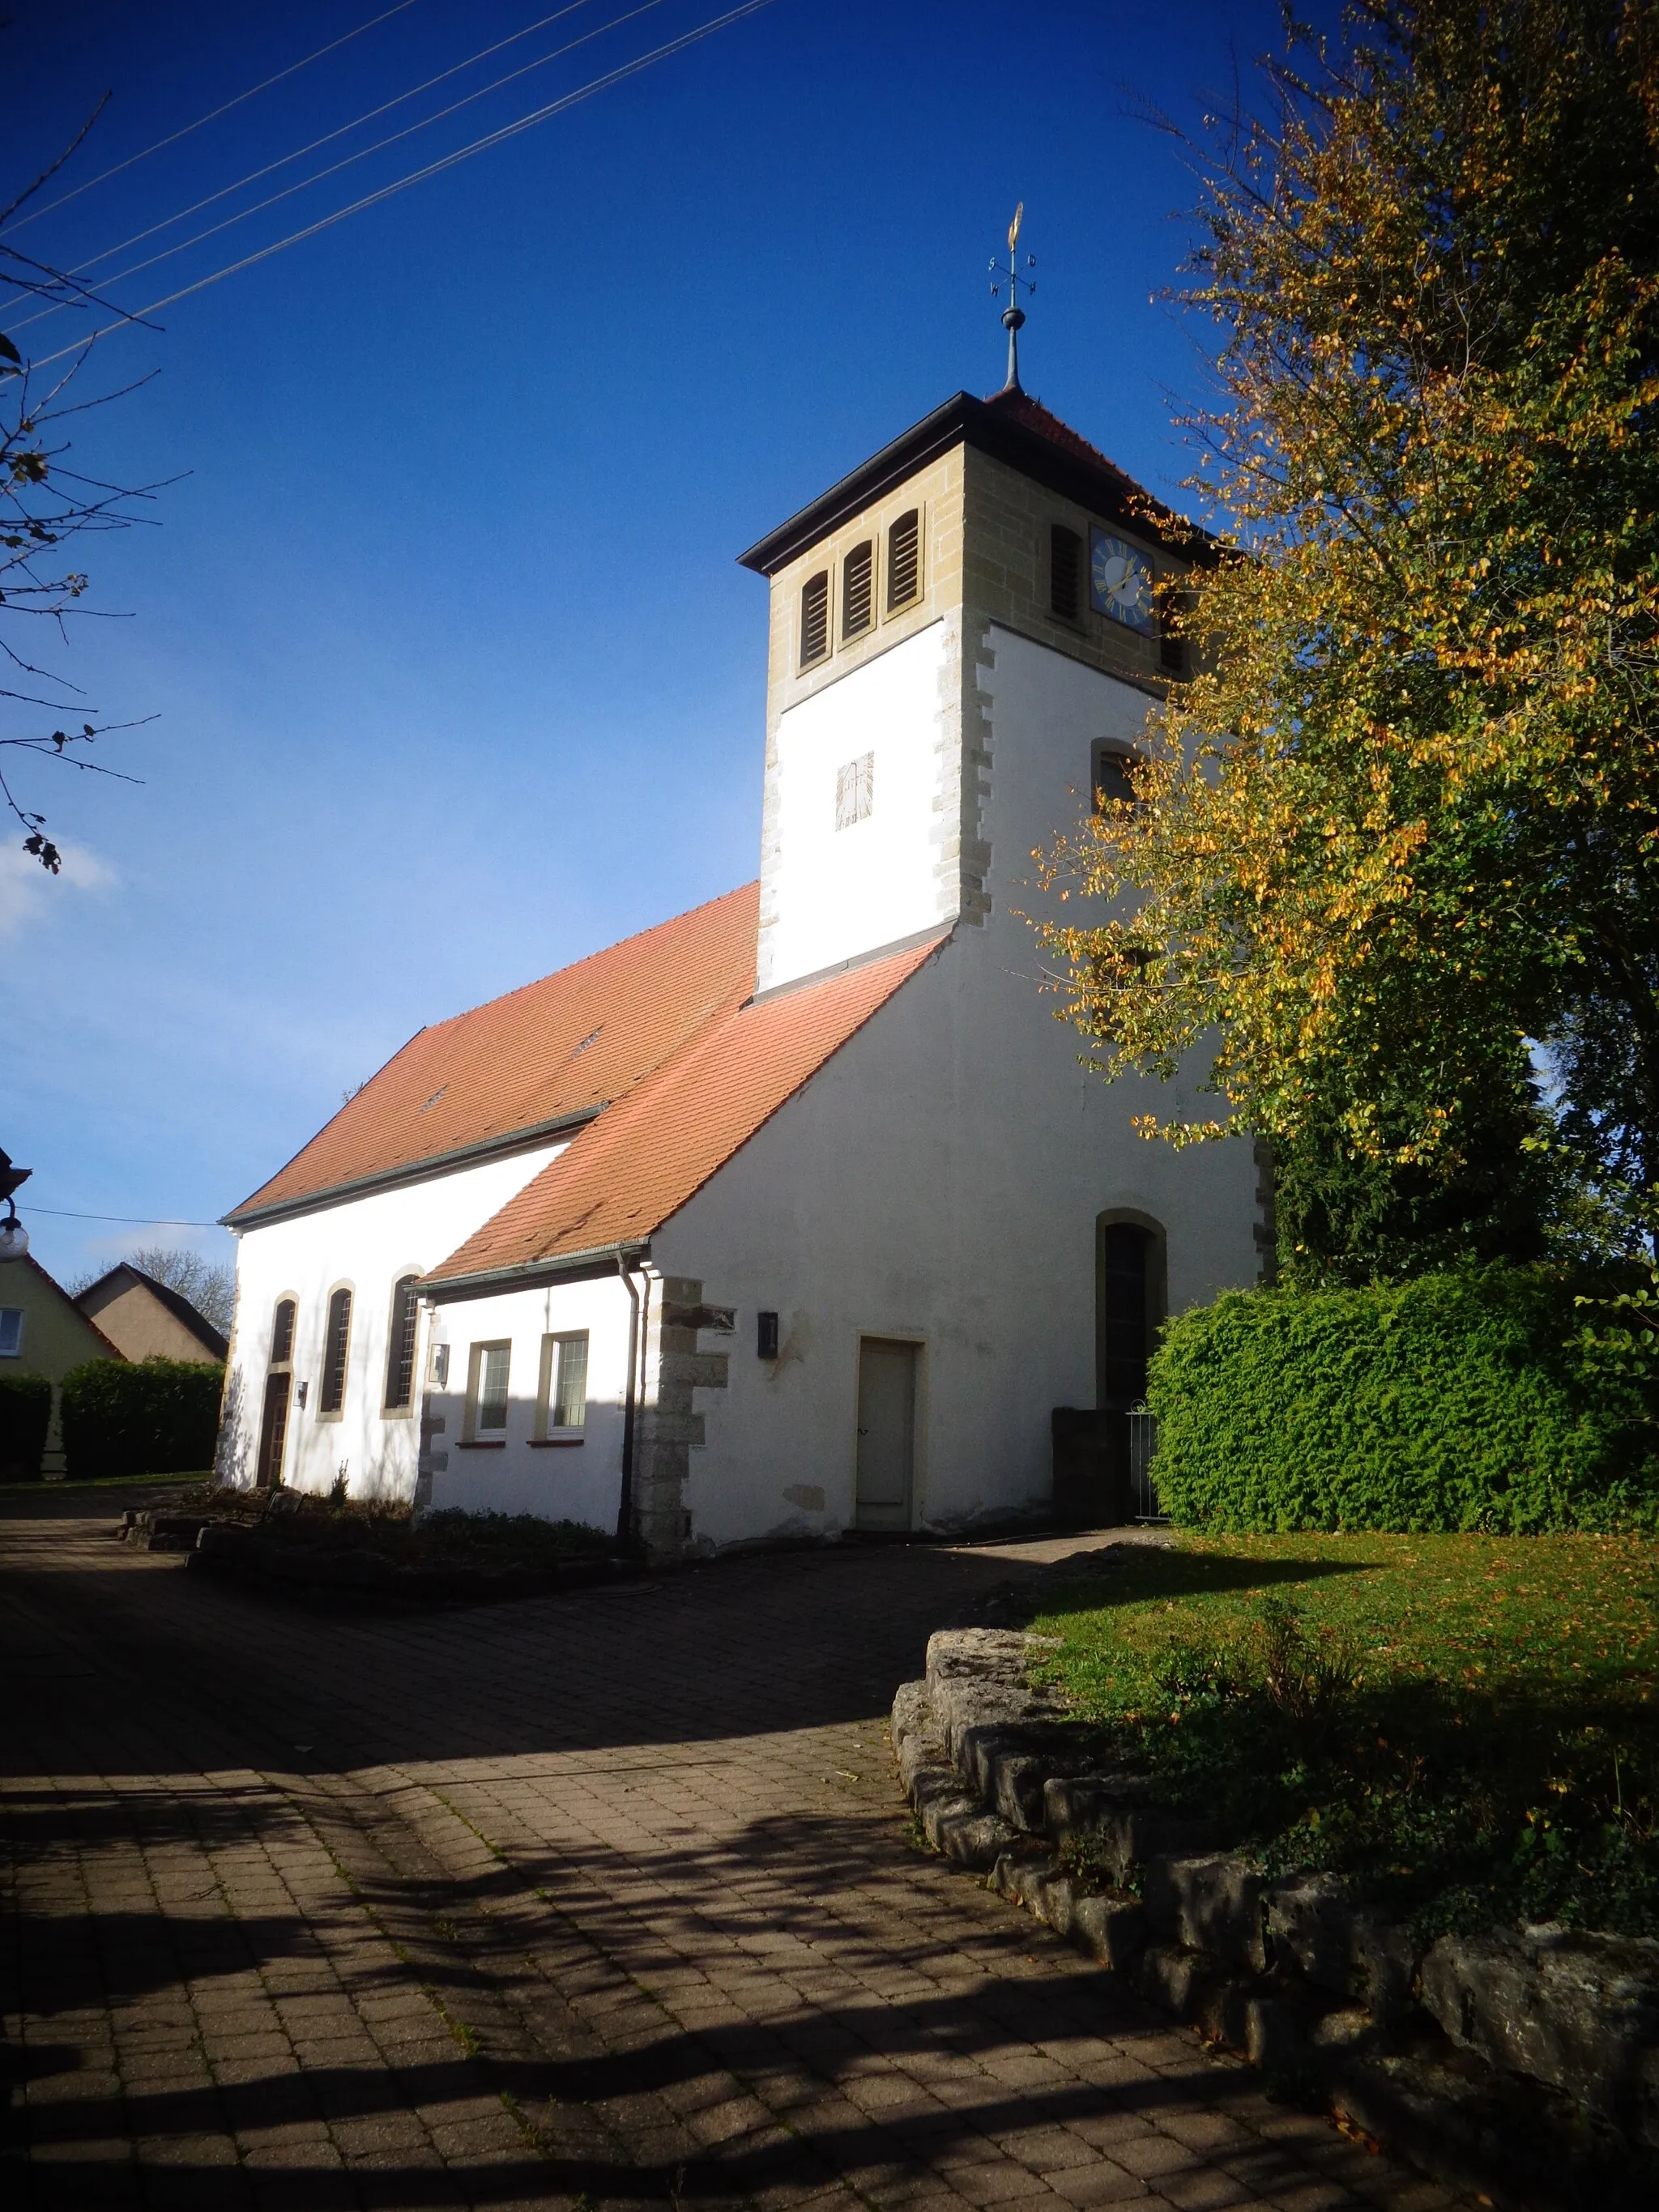 Photo showing: Church, Jungholzhausen, Germany 2017